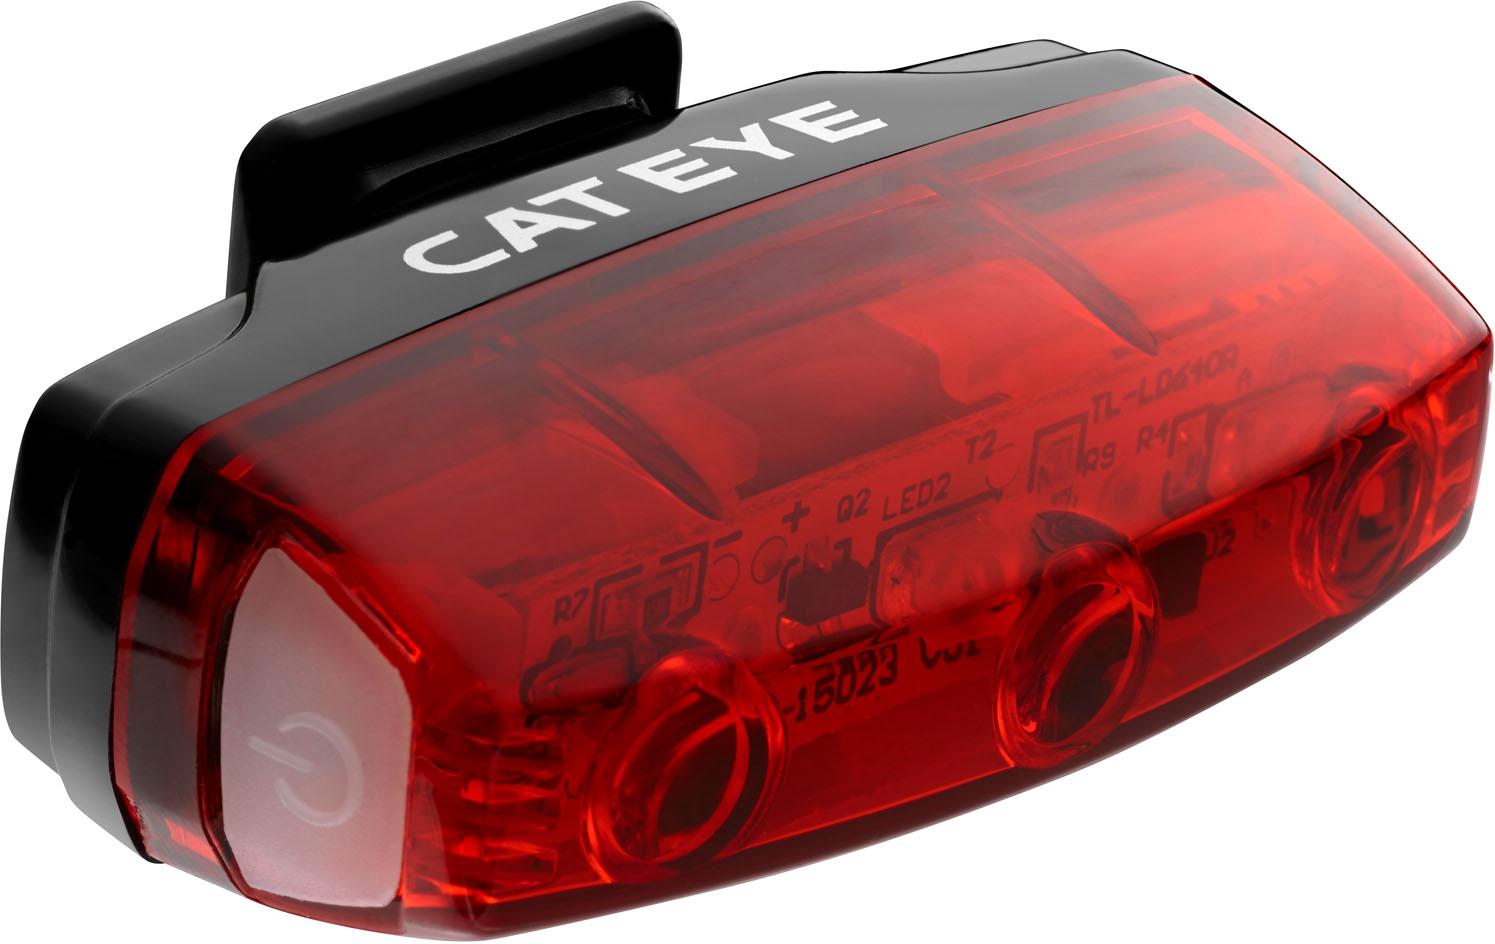 Cateye Rapid Micro Usb Rechargeable Rear Light - Black/red